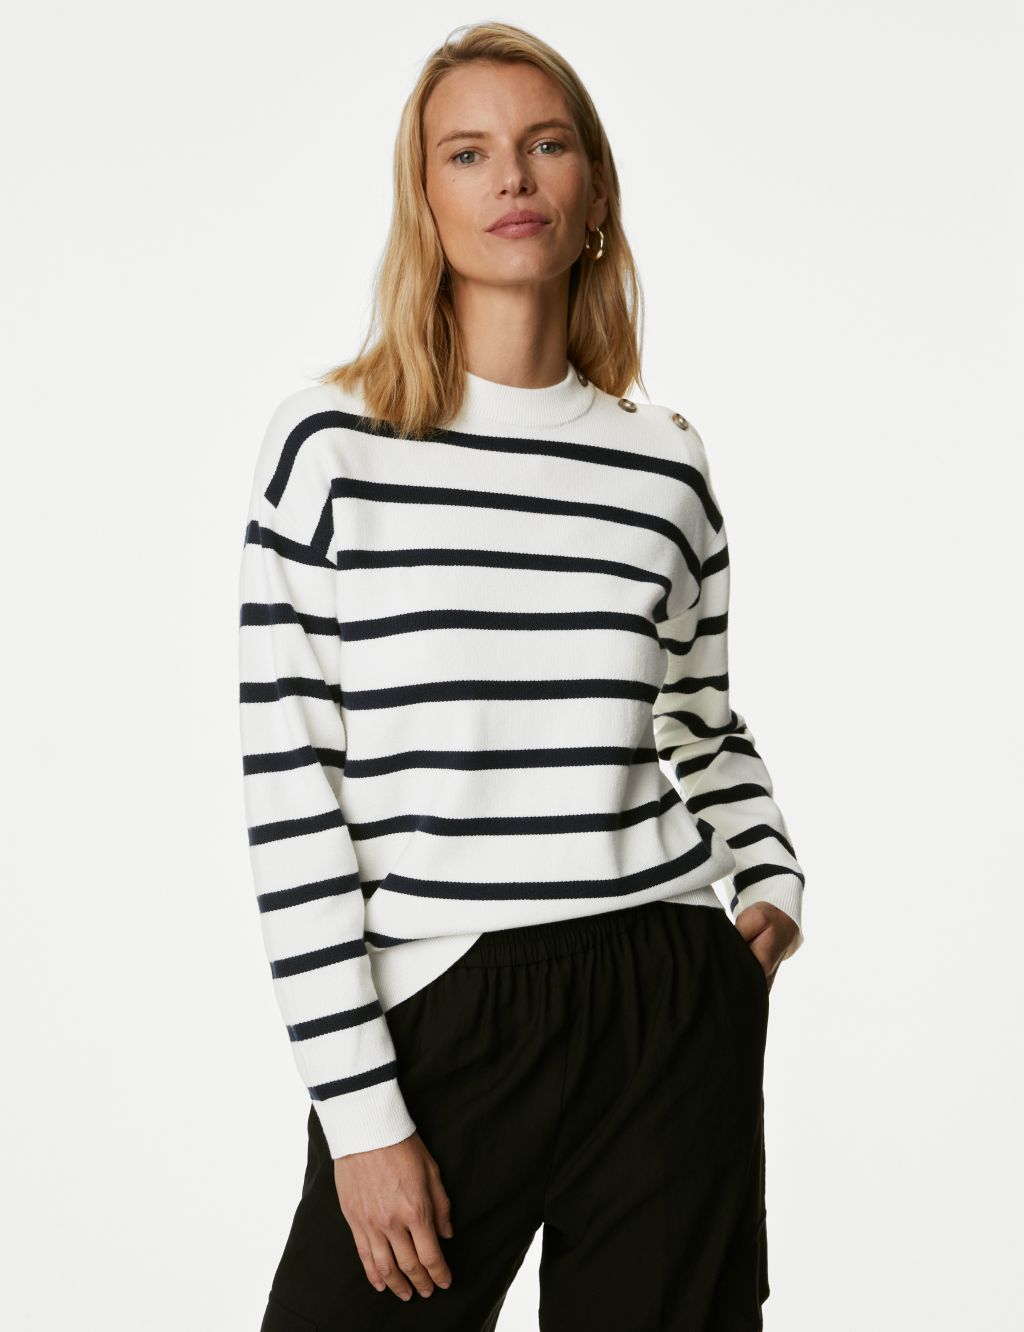 Soft Touch Striped Crew Neck Jumper image 3